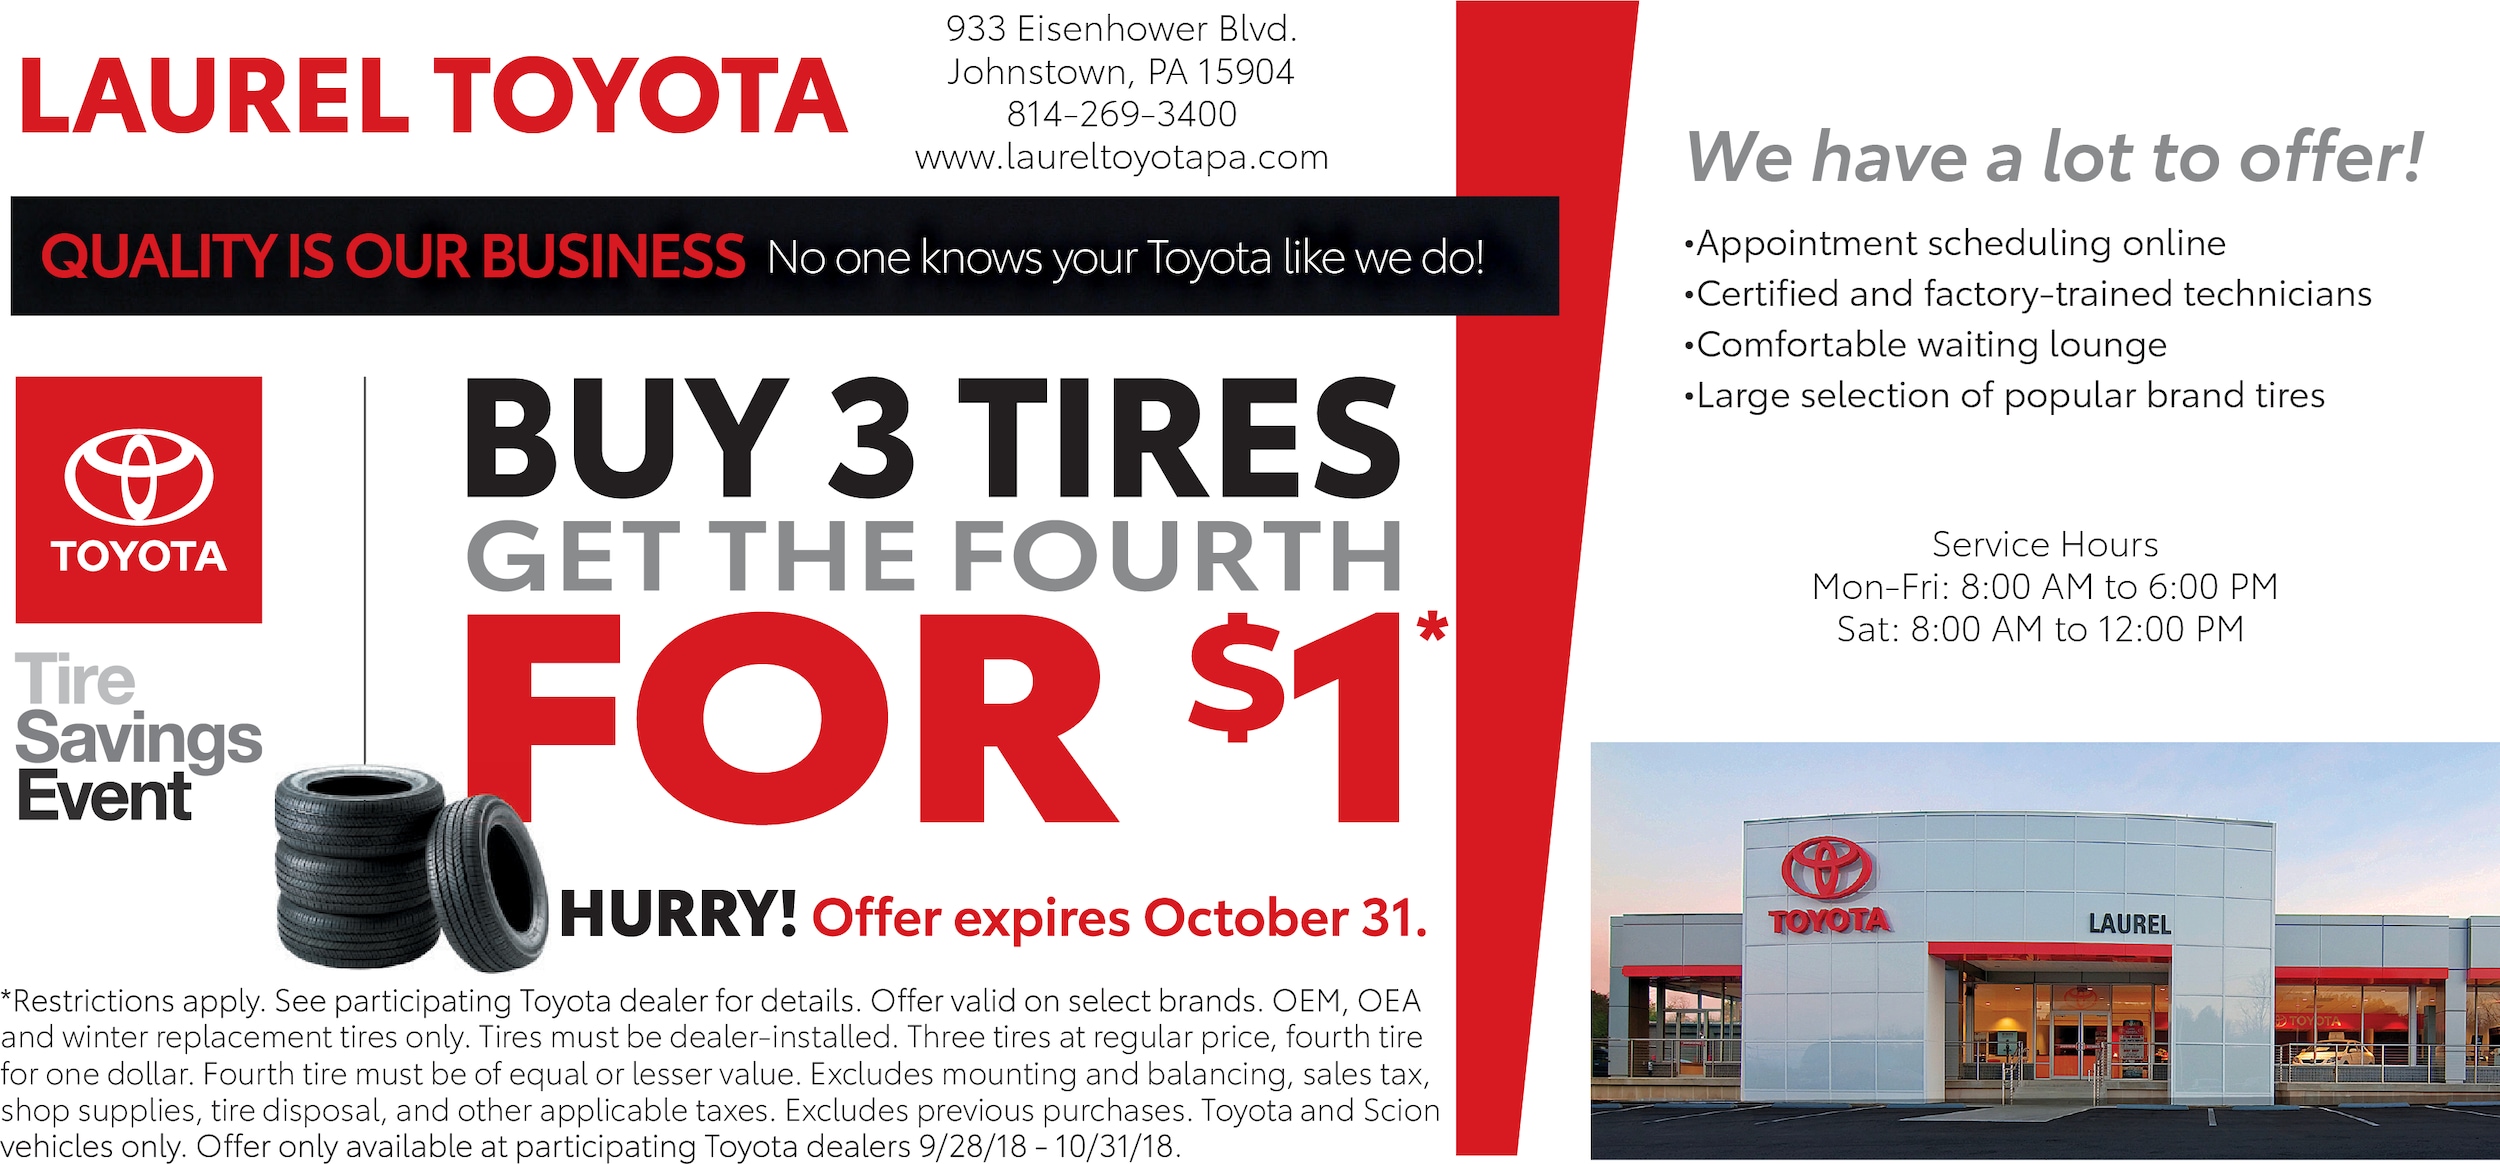 Buy 3 Tires, Get the FOURTH for 1 Laurel Toyota